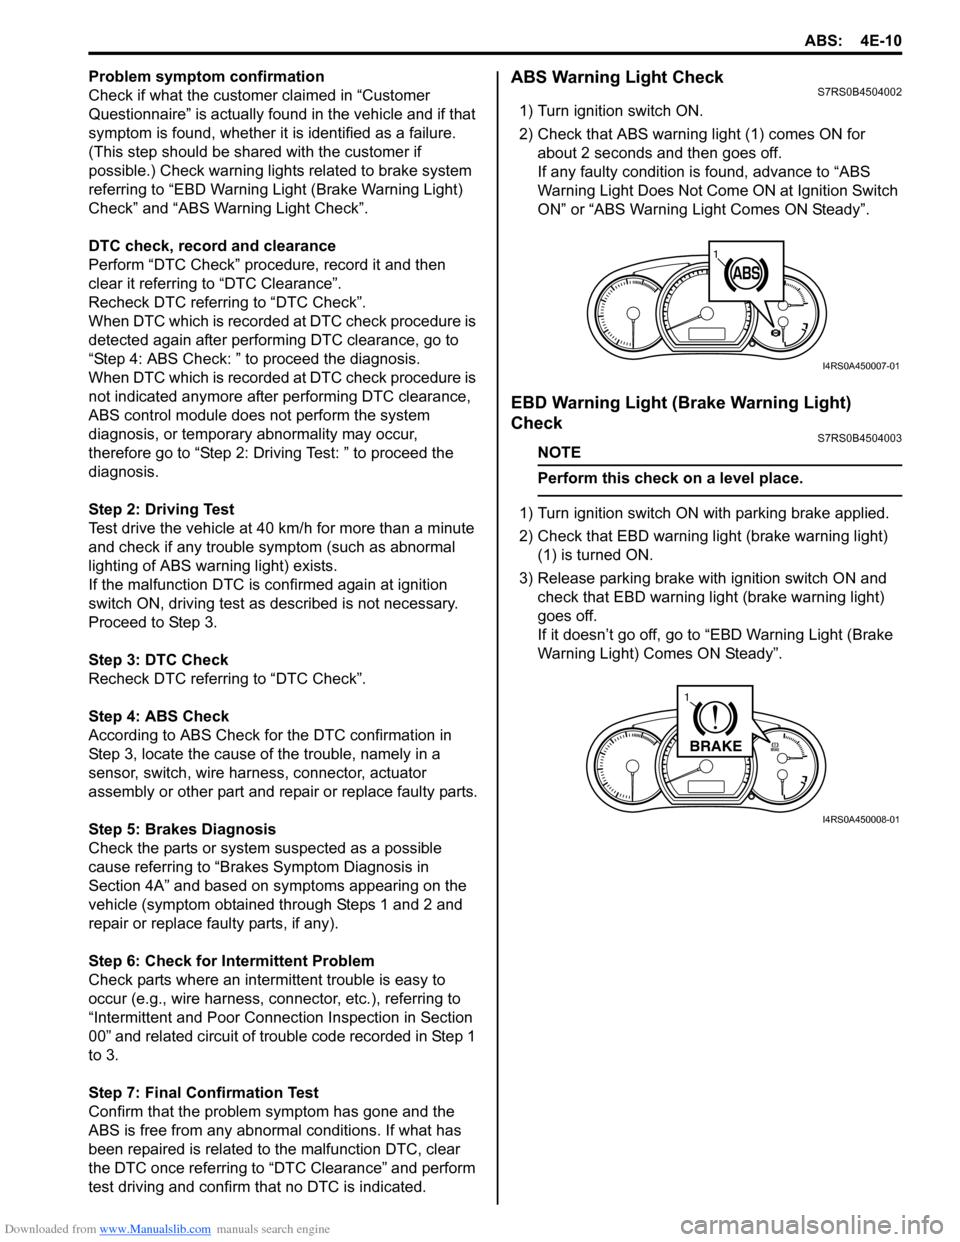 SUZUKI SWIFT 2007 2.G Service Workshop Manual Downloaded from www.Manualslib.com manuals search engine ABS: 4E-10
Problem symptom confirmation
Check if what the customer claimed in “Customer 
Questionnaire” is actually found in the vehicle an